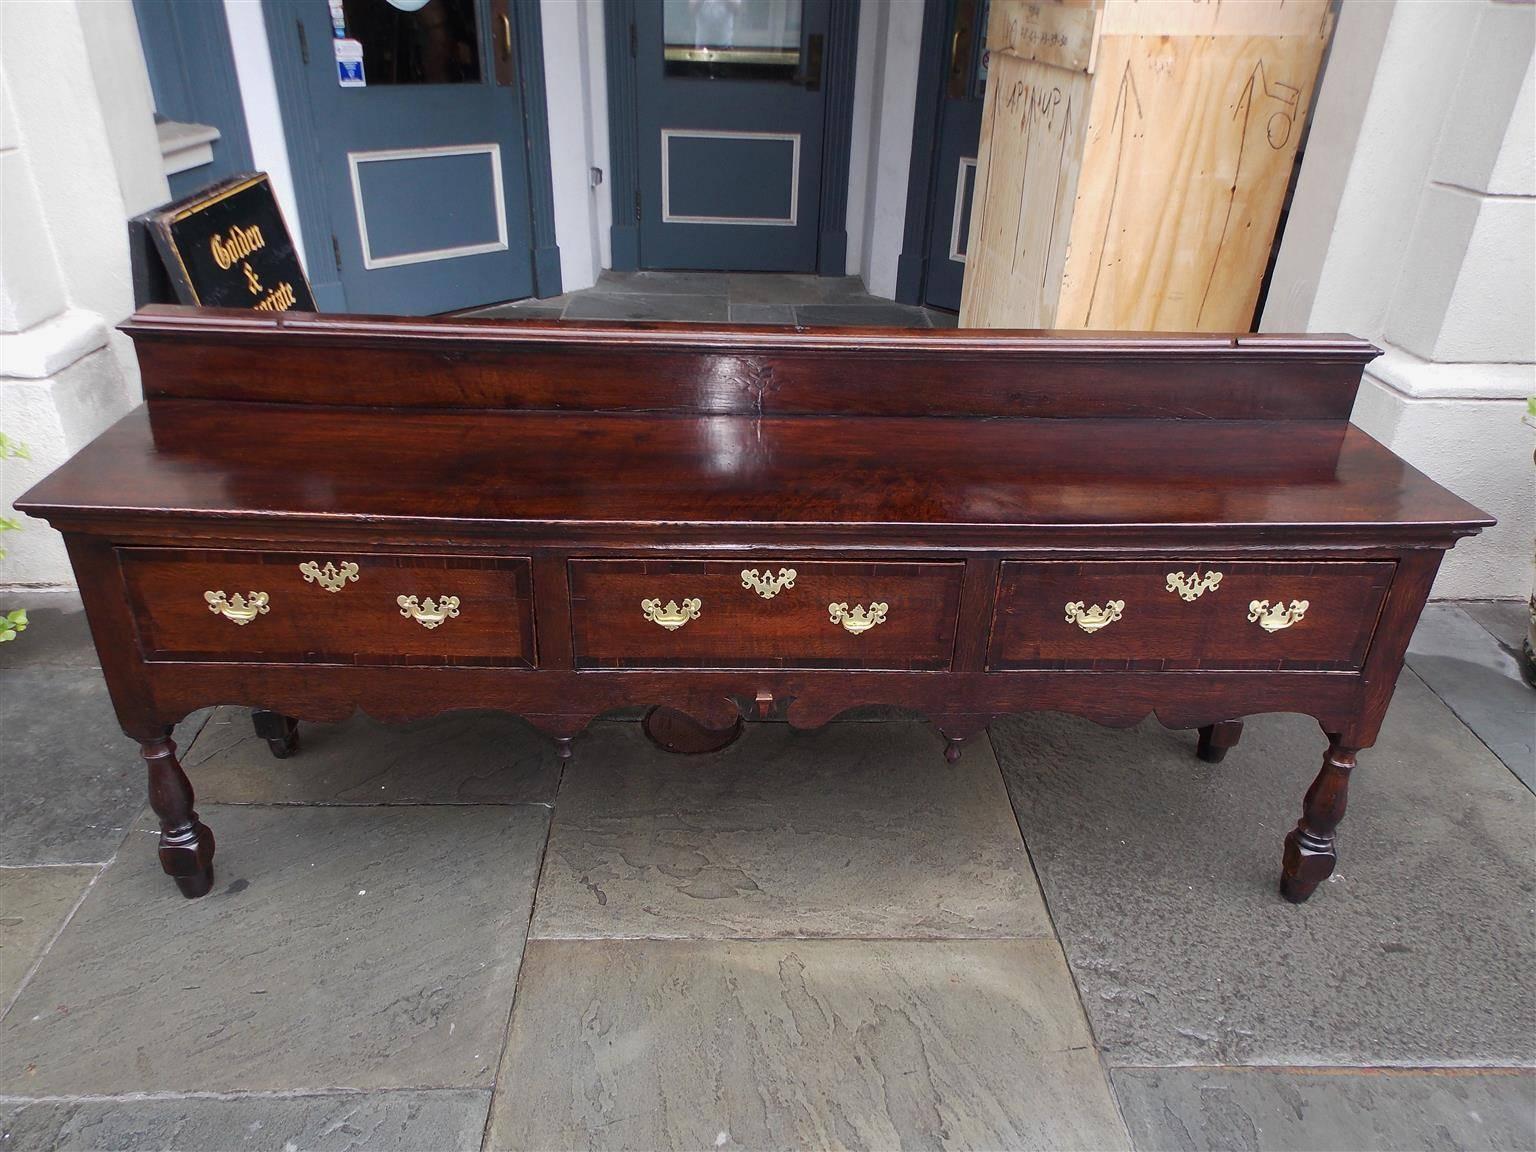 English oak console with a molded edge floral inlaid back splash, three fitted cross banded drawers with the original brasses, carved scalloped skirt with flanking centered finials, and terminating on the original turned bulbous squared legs, Late